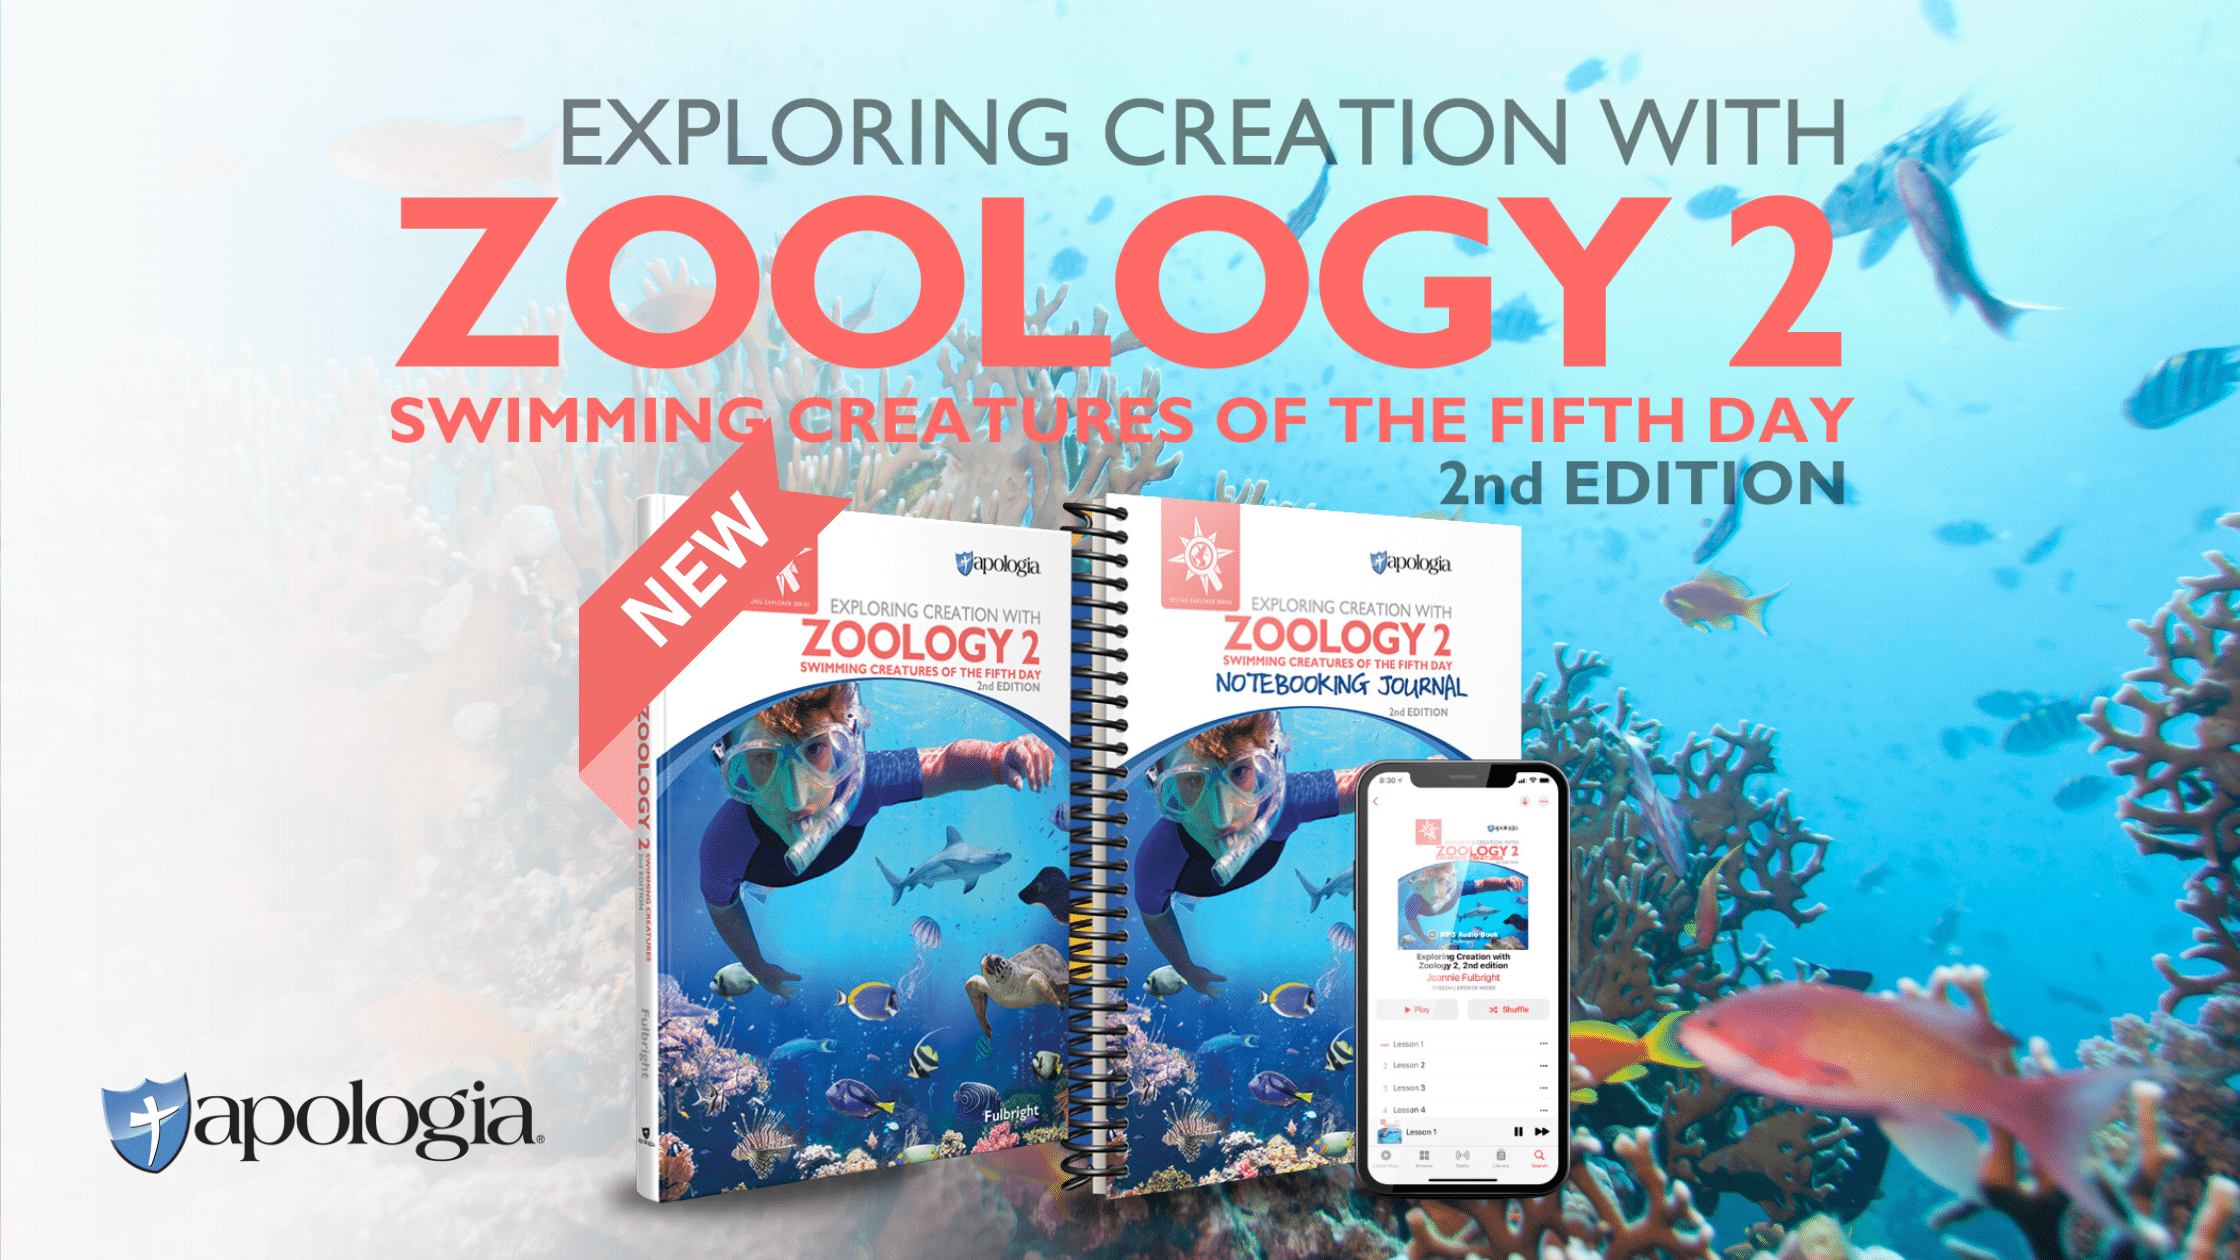 Introducing Exploring Creation with Zoology 2: Swimming Creatures of the Fifth Day, 2nd Edition